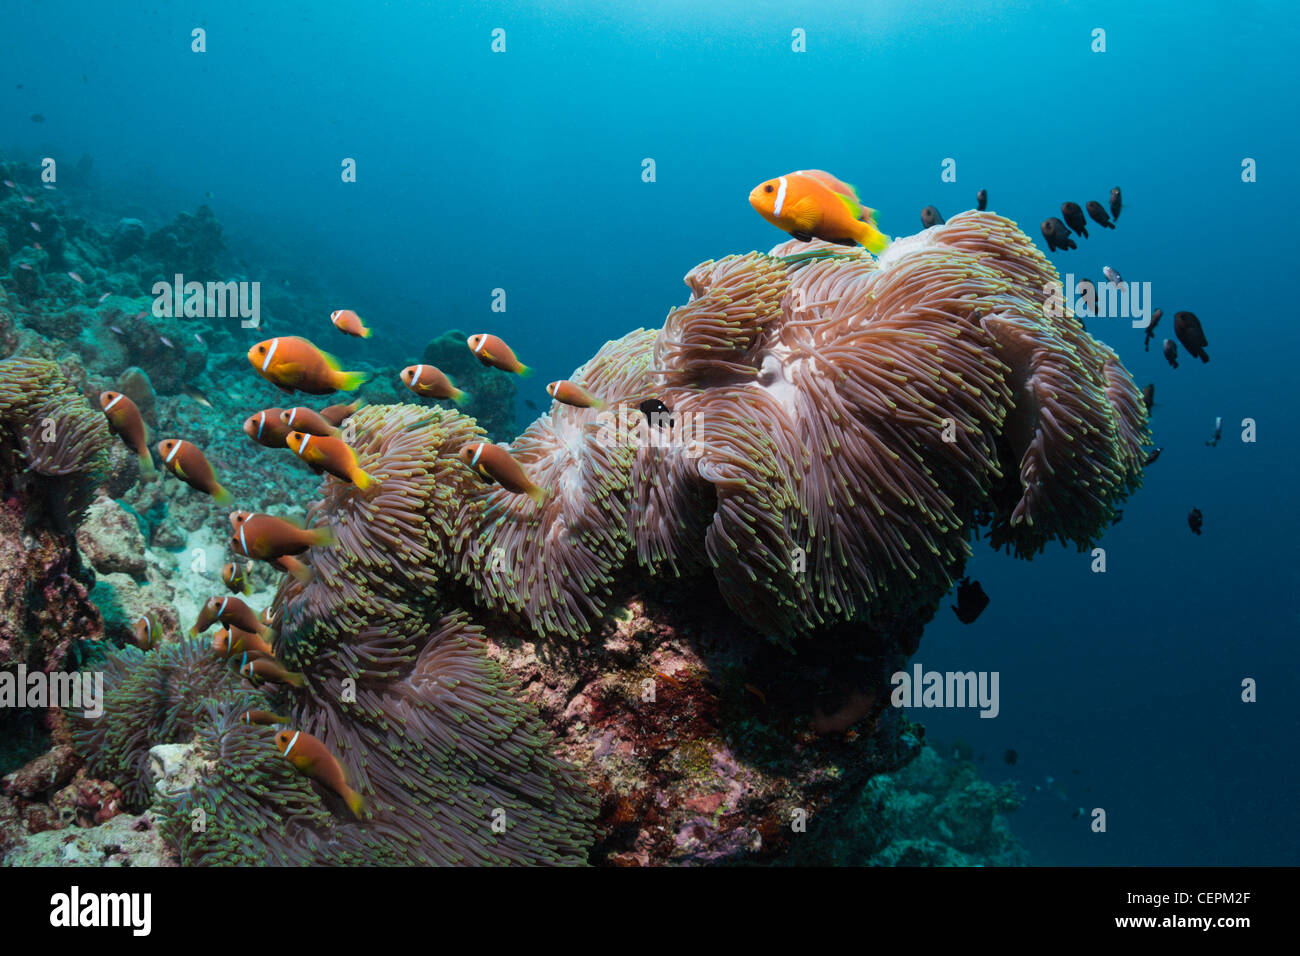 Family of Maldives Anemonefish, Amphiprion nigripes, Heteractis magnifica, Baa Atoll, Indian Ocean, Maldives Stock Photo